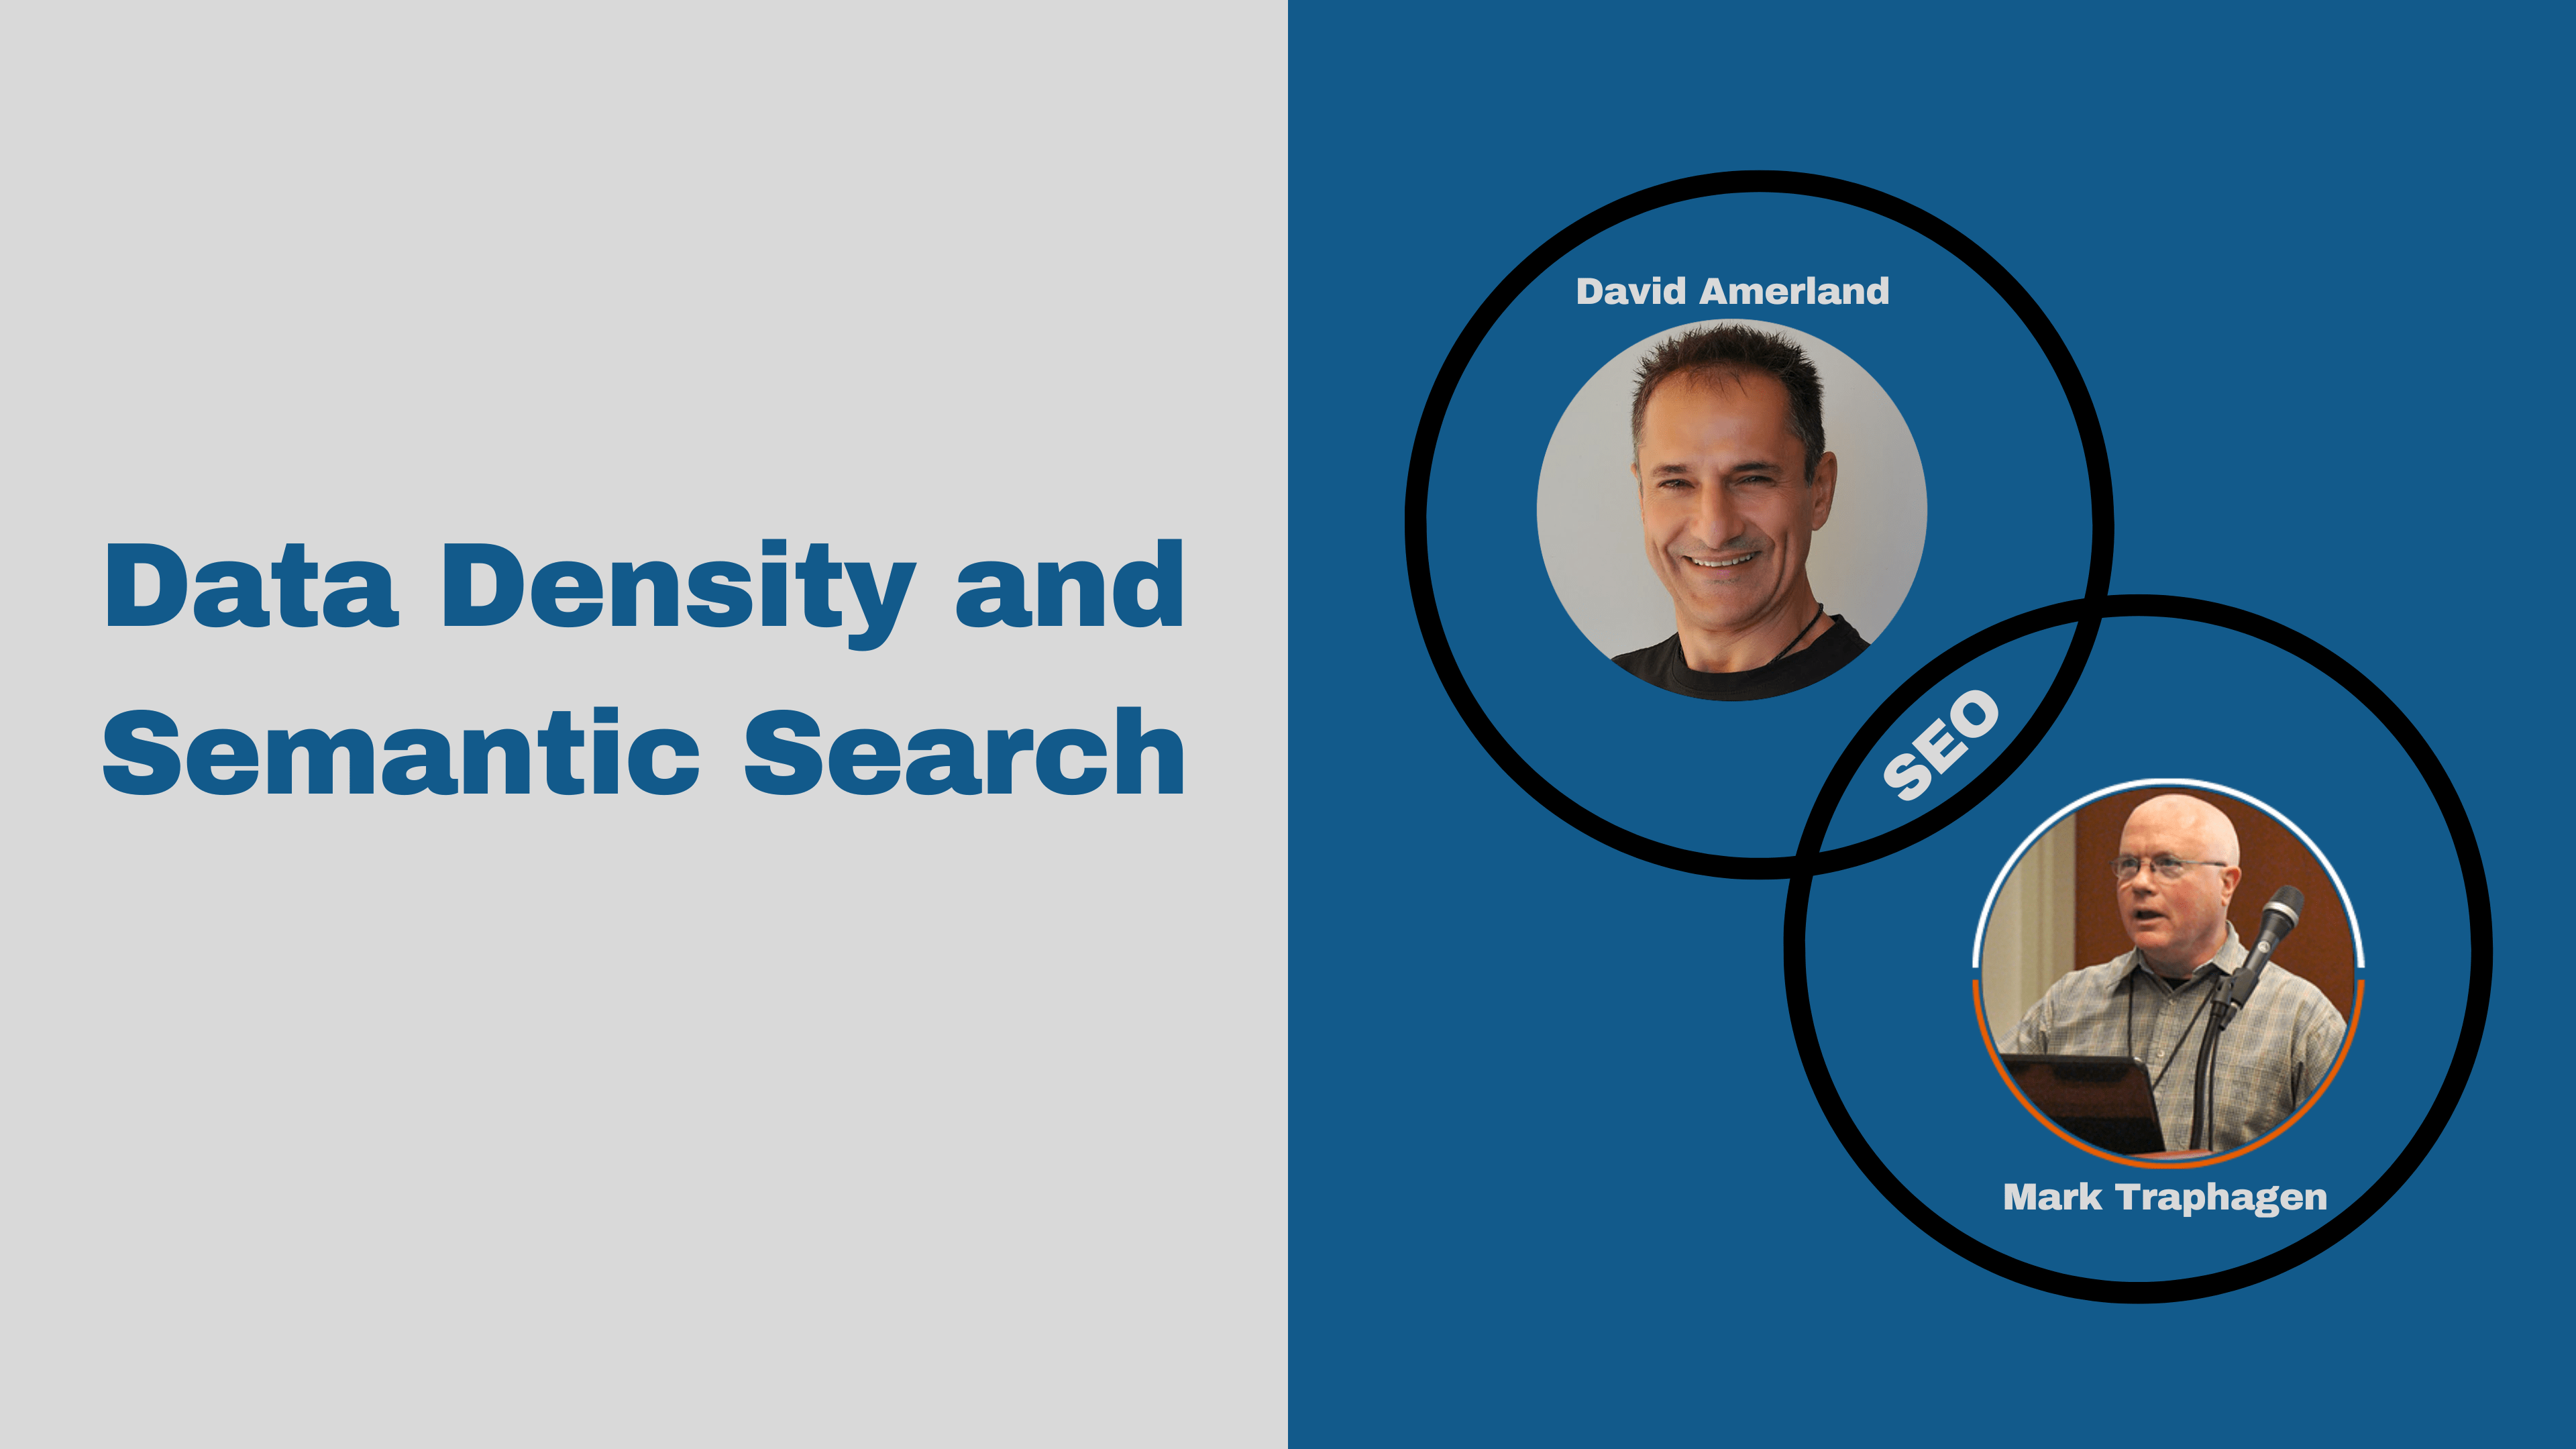 Data Density and Semantic Search – Hangout On Air with David Amerland and Mark Traphagen